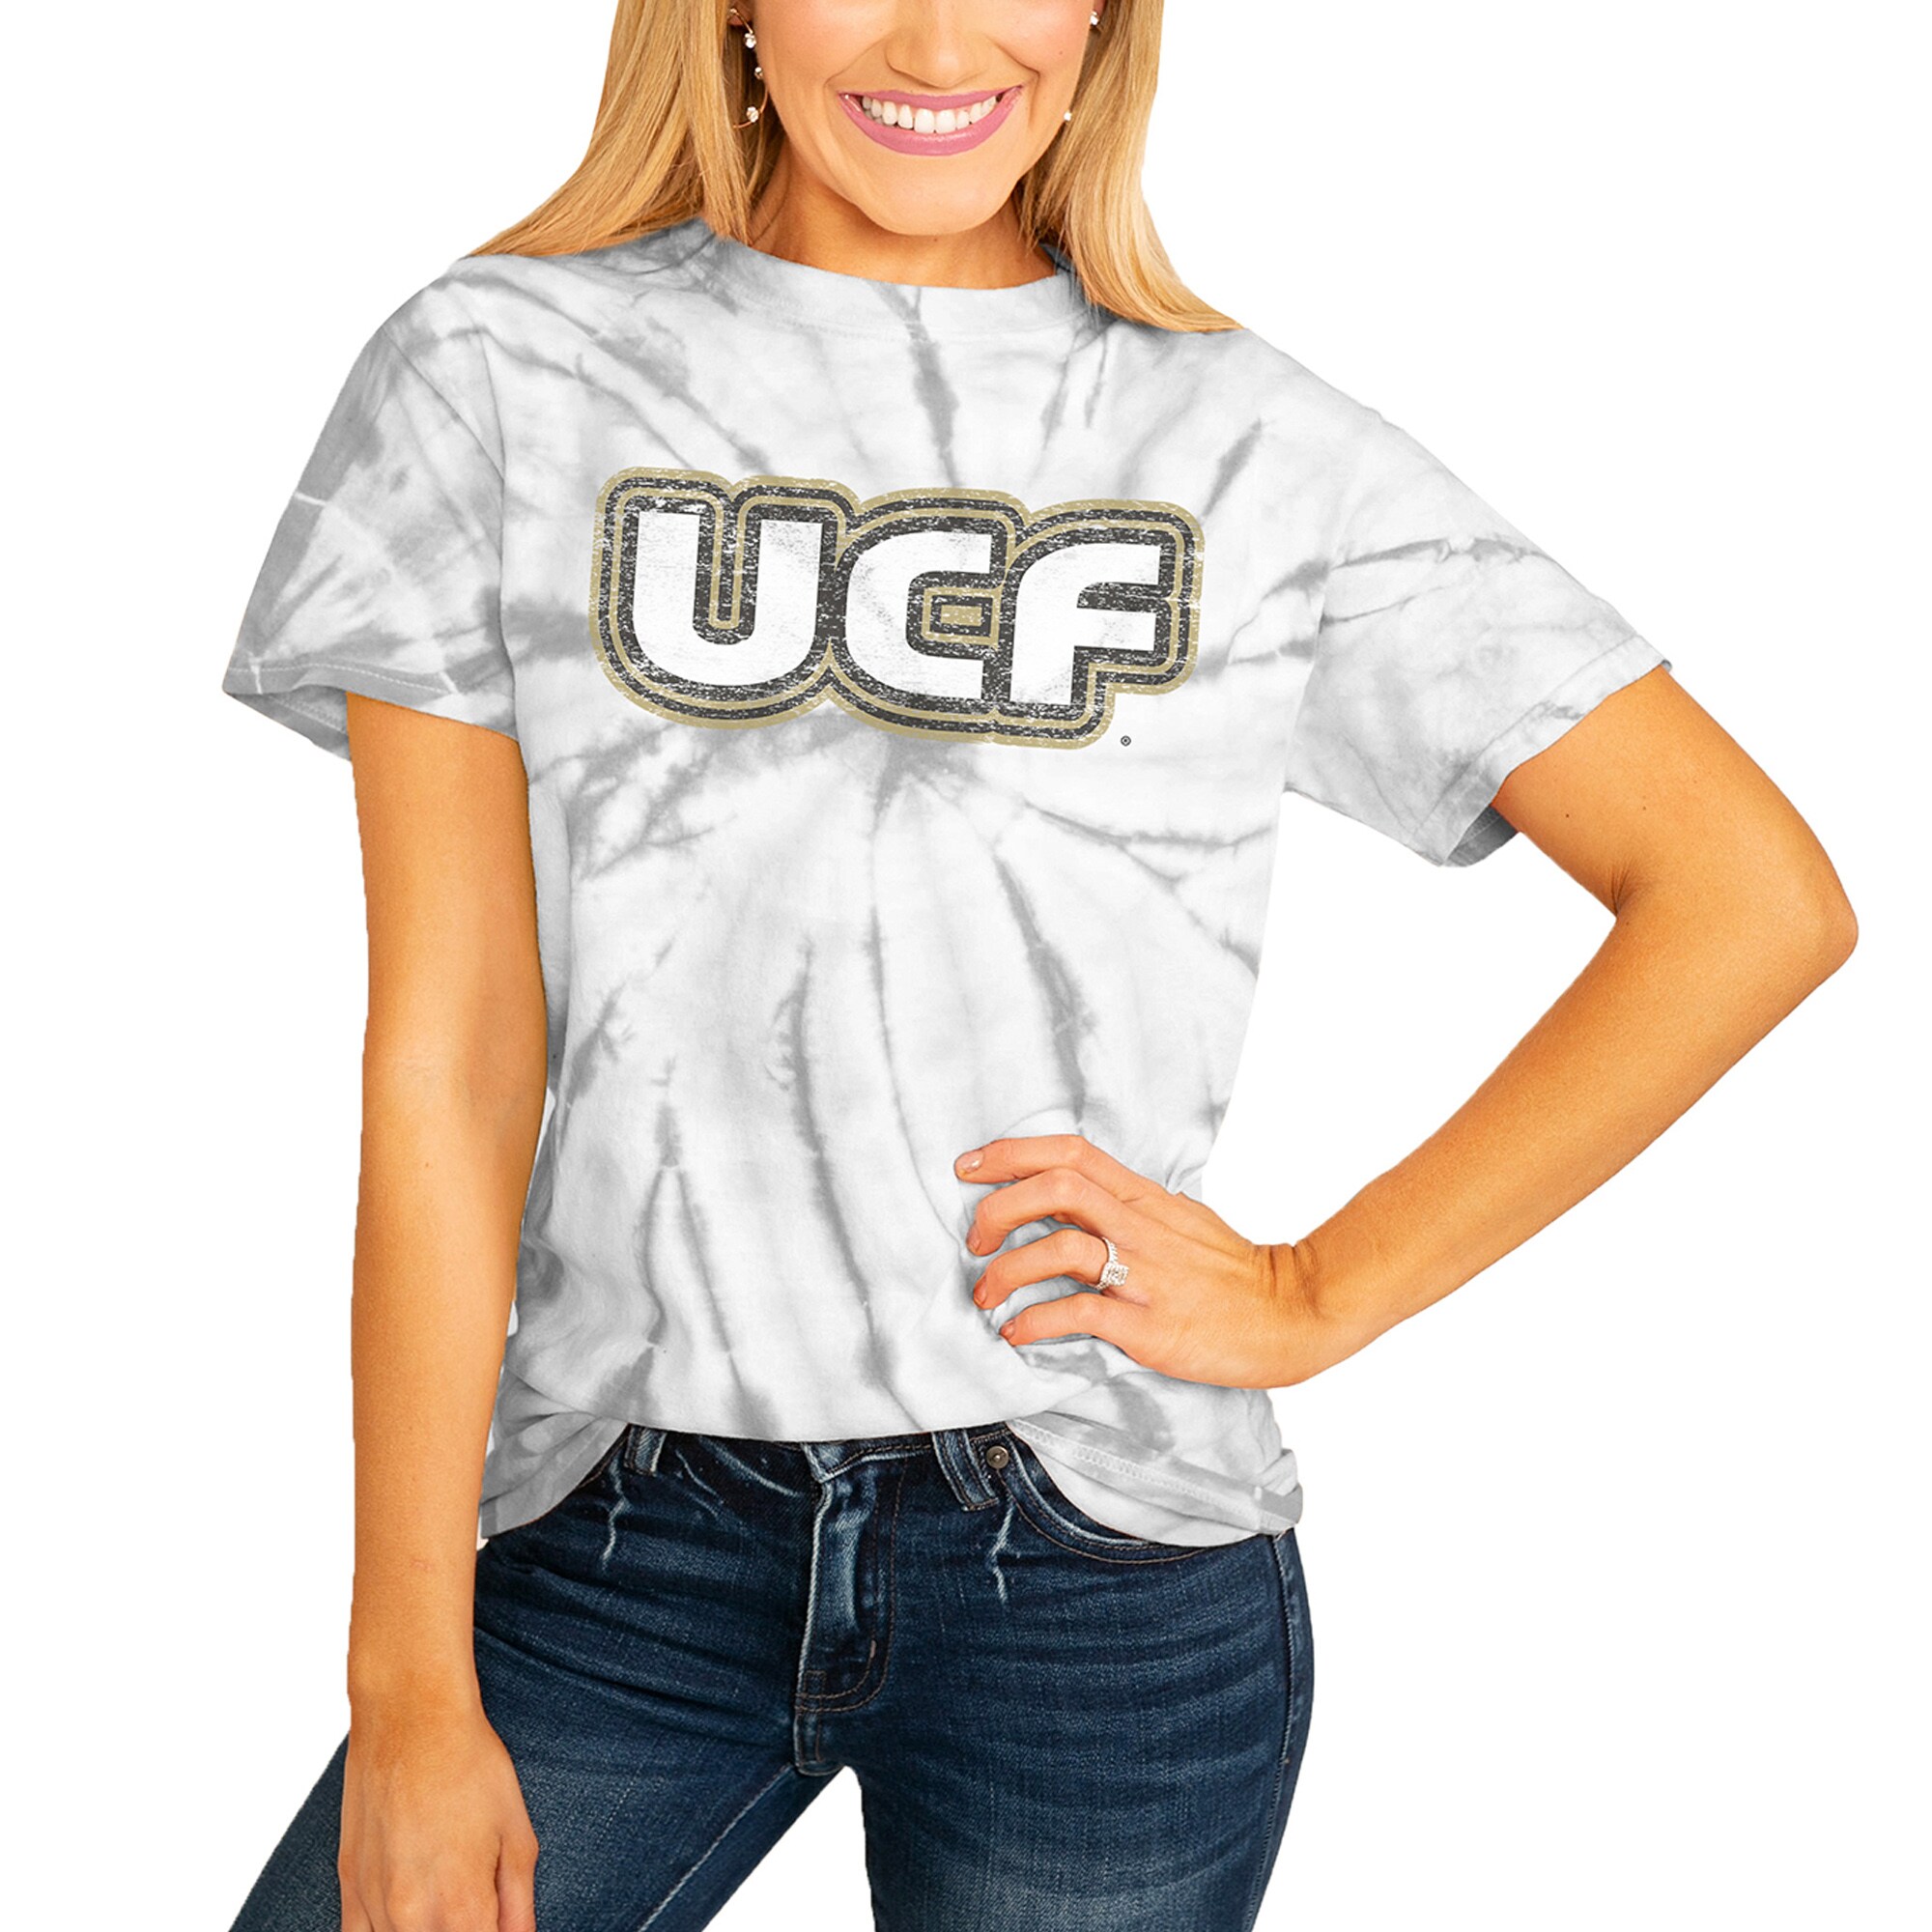 ucf jeans price